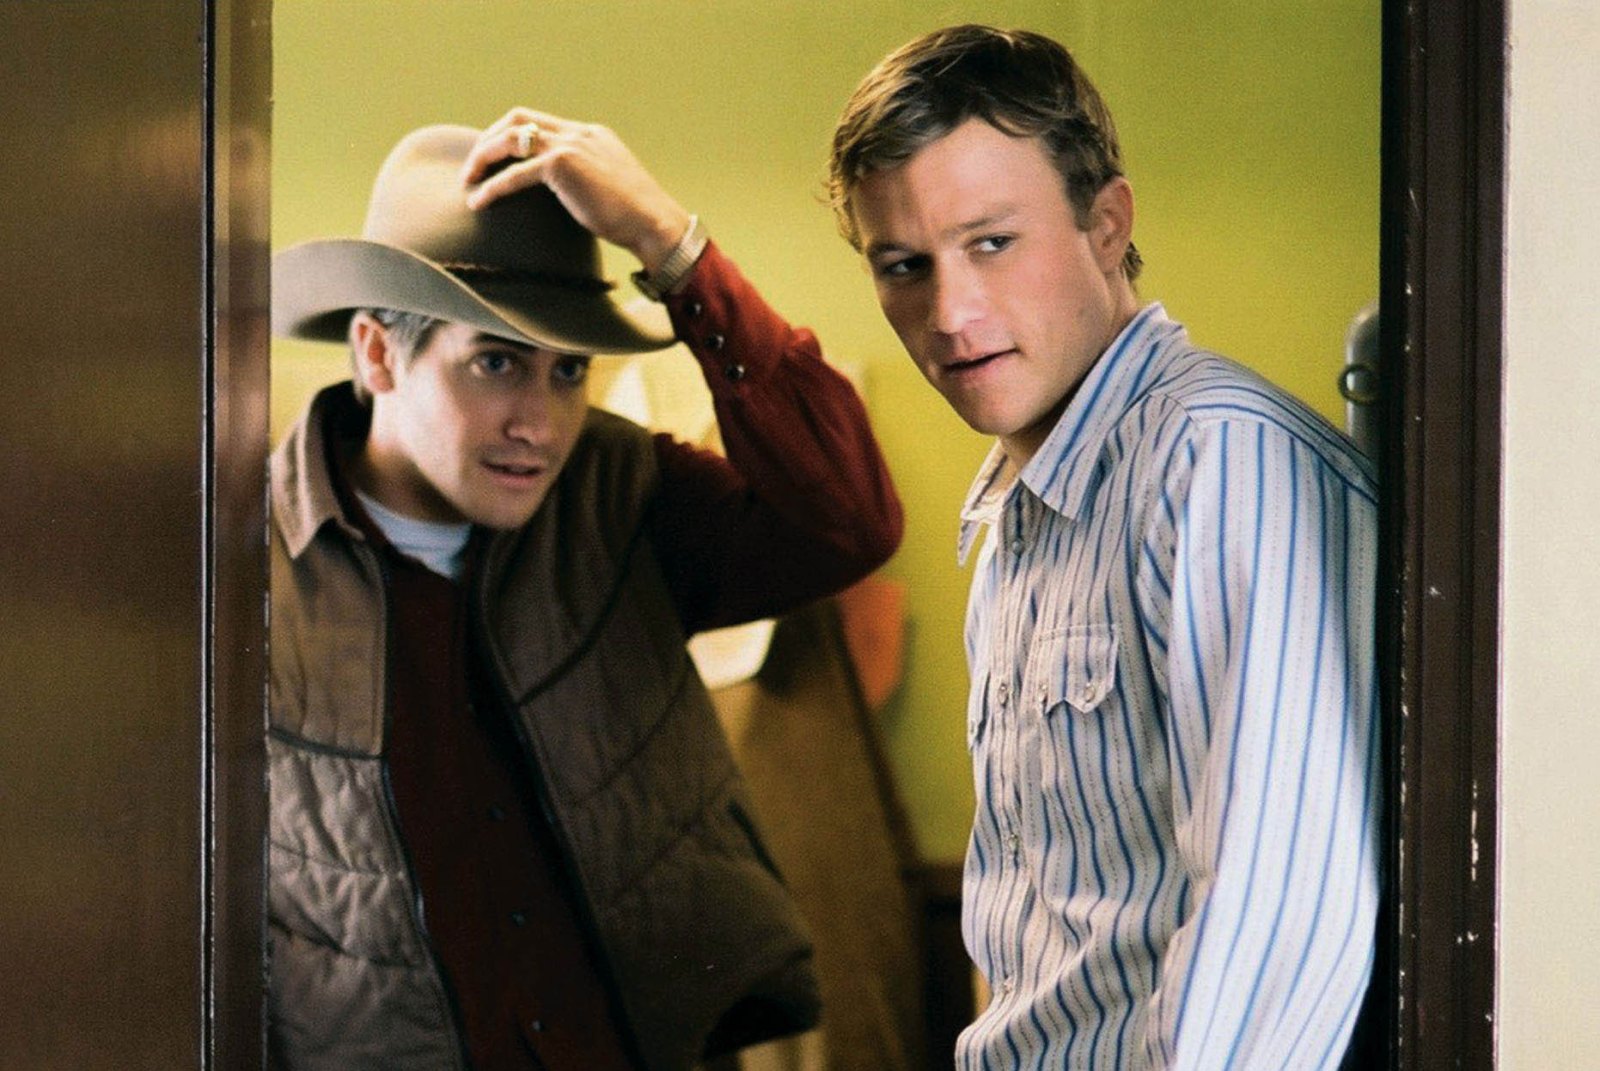 Stars Who Turned Down Roles in Brokeback Mountain